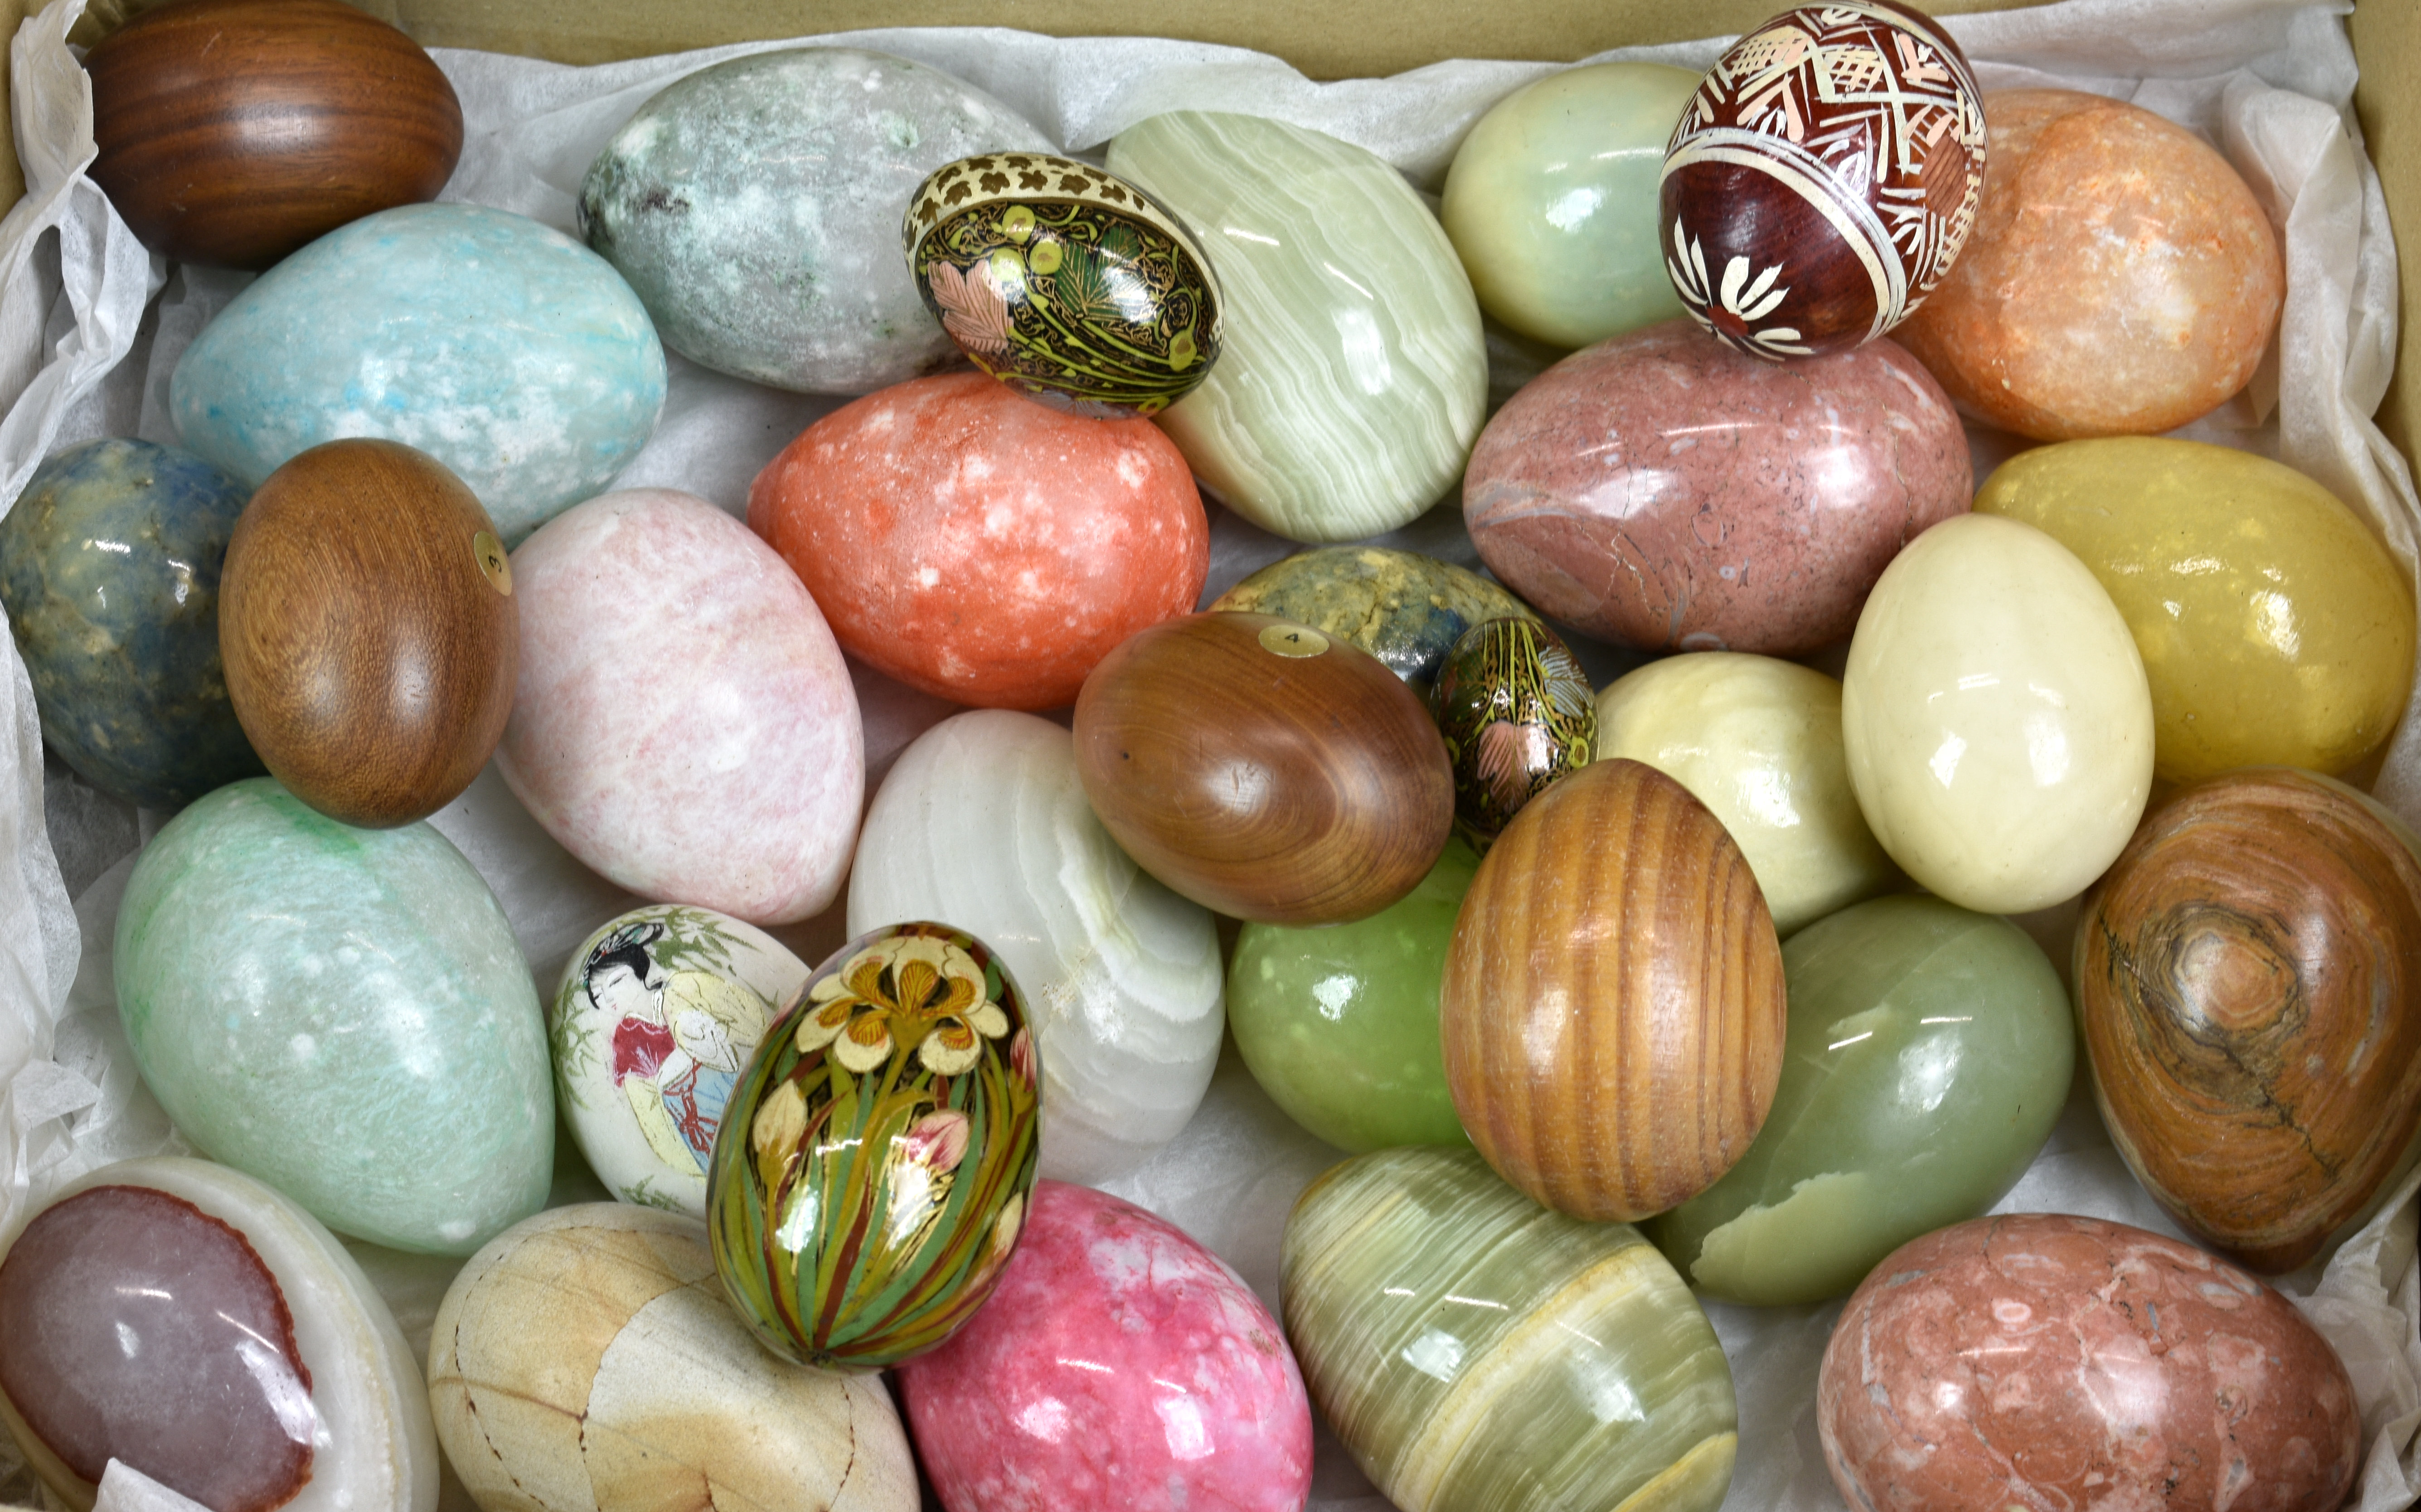 A large collection of natural carved semi-precious stone and wooden eggs. (36)